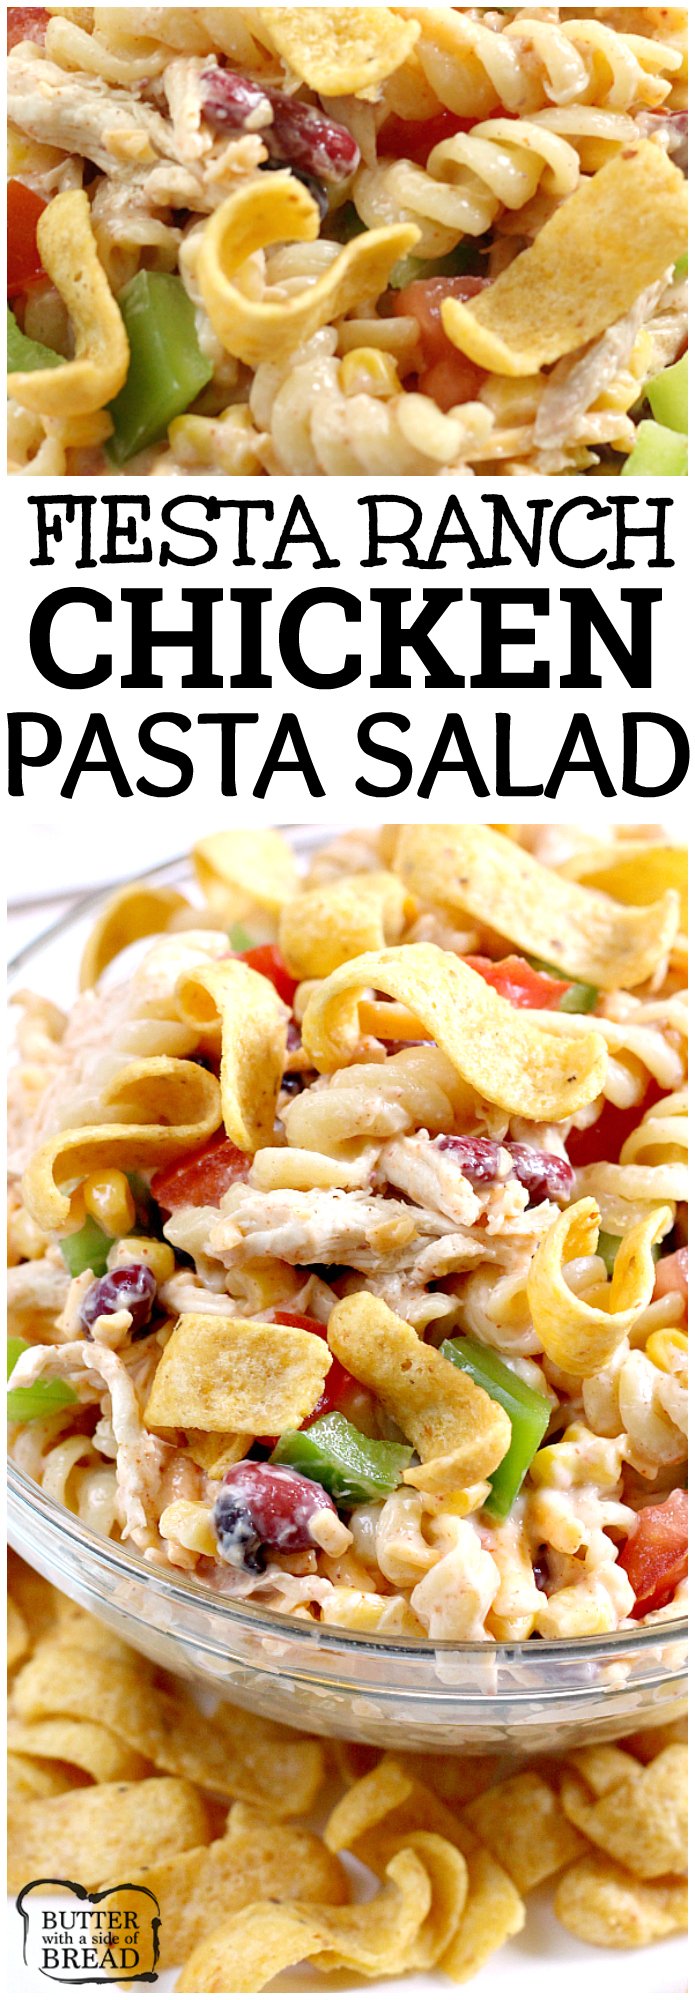 Fiesta Ranch Chicken Pasta Salad is full of fresh southwestern flavors with black beans, corn, cheese and tomatoes. This hearty chicken pasta salad recipe topped with Fritos is perfect as a main dish or a side dish for potlucks and parties!